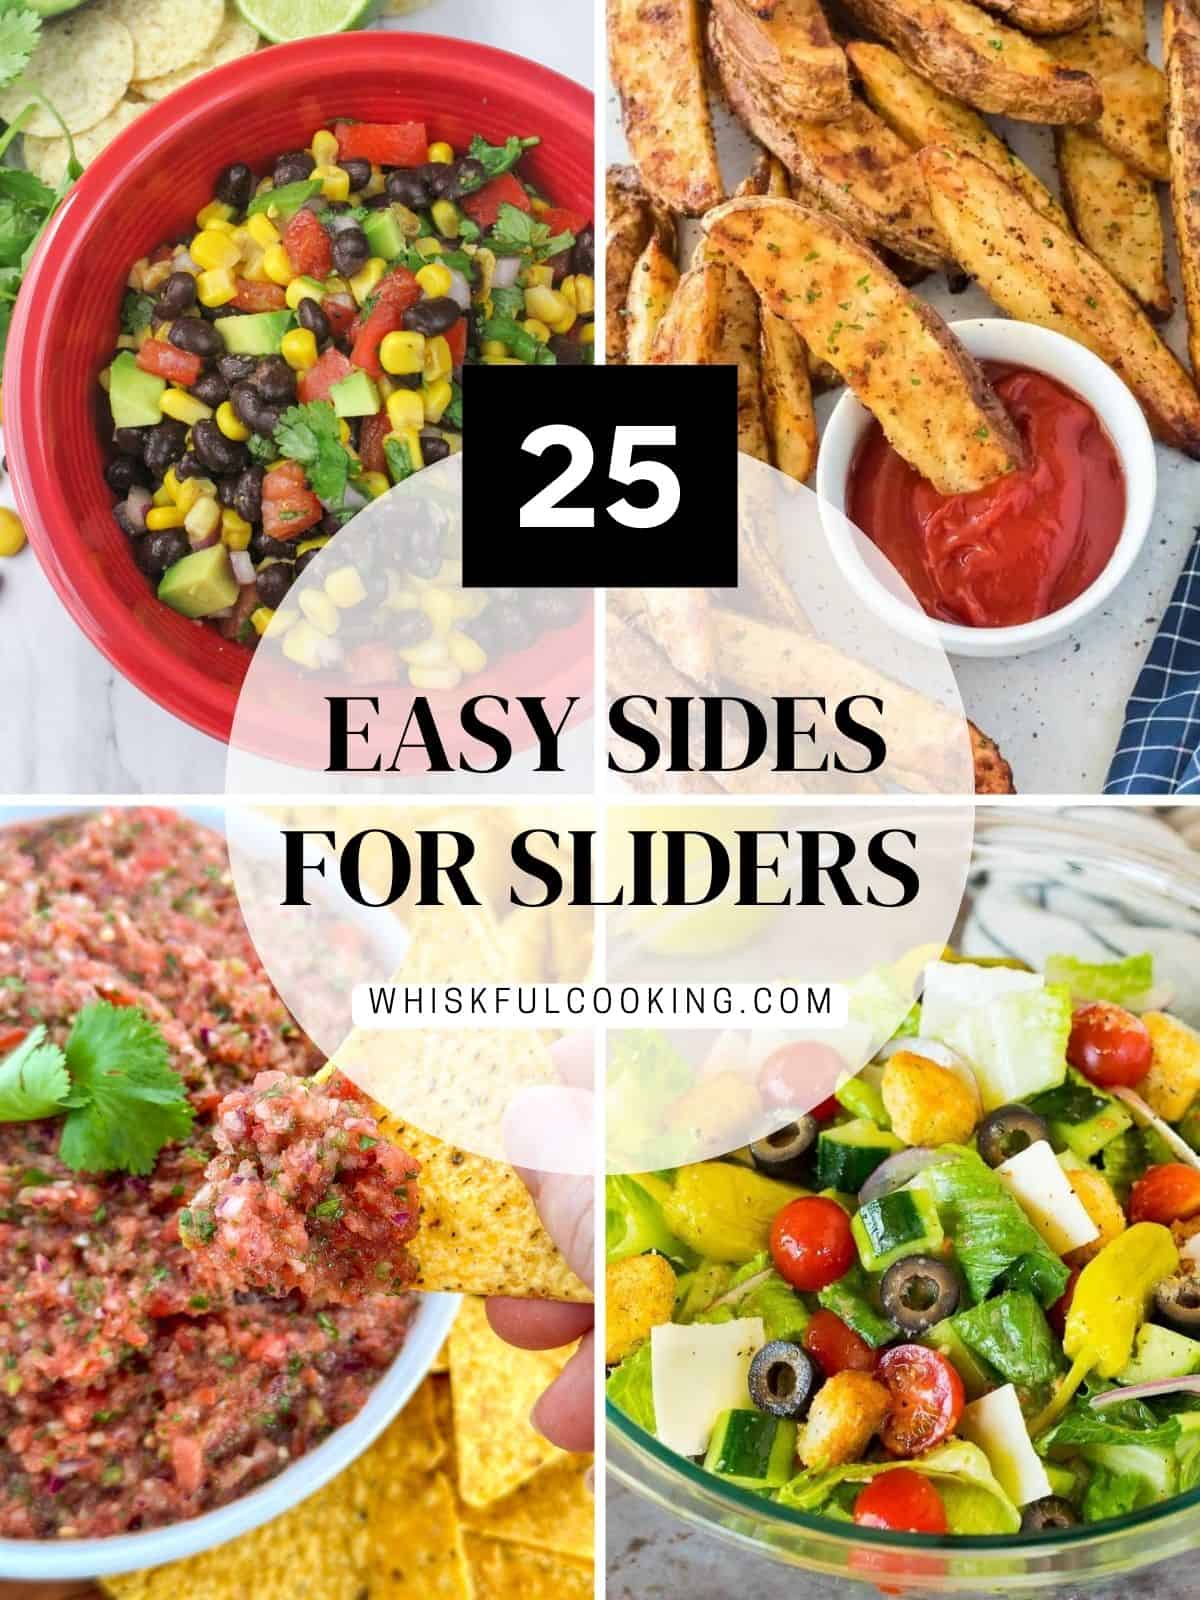 collage of photos of side dishes with the text "25 Easy Sides For Sliders" over the top.